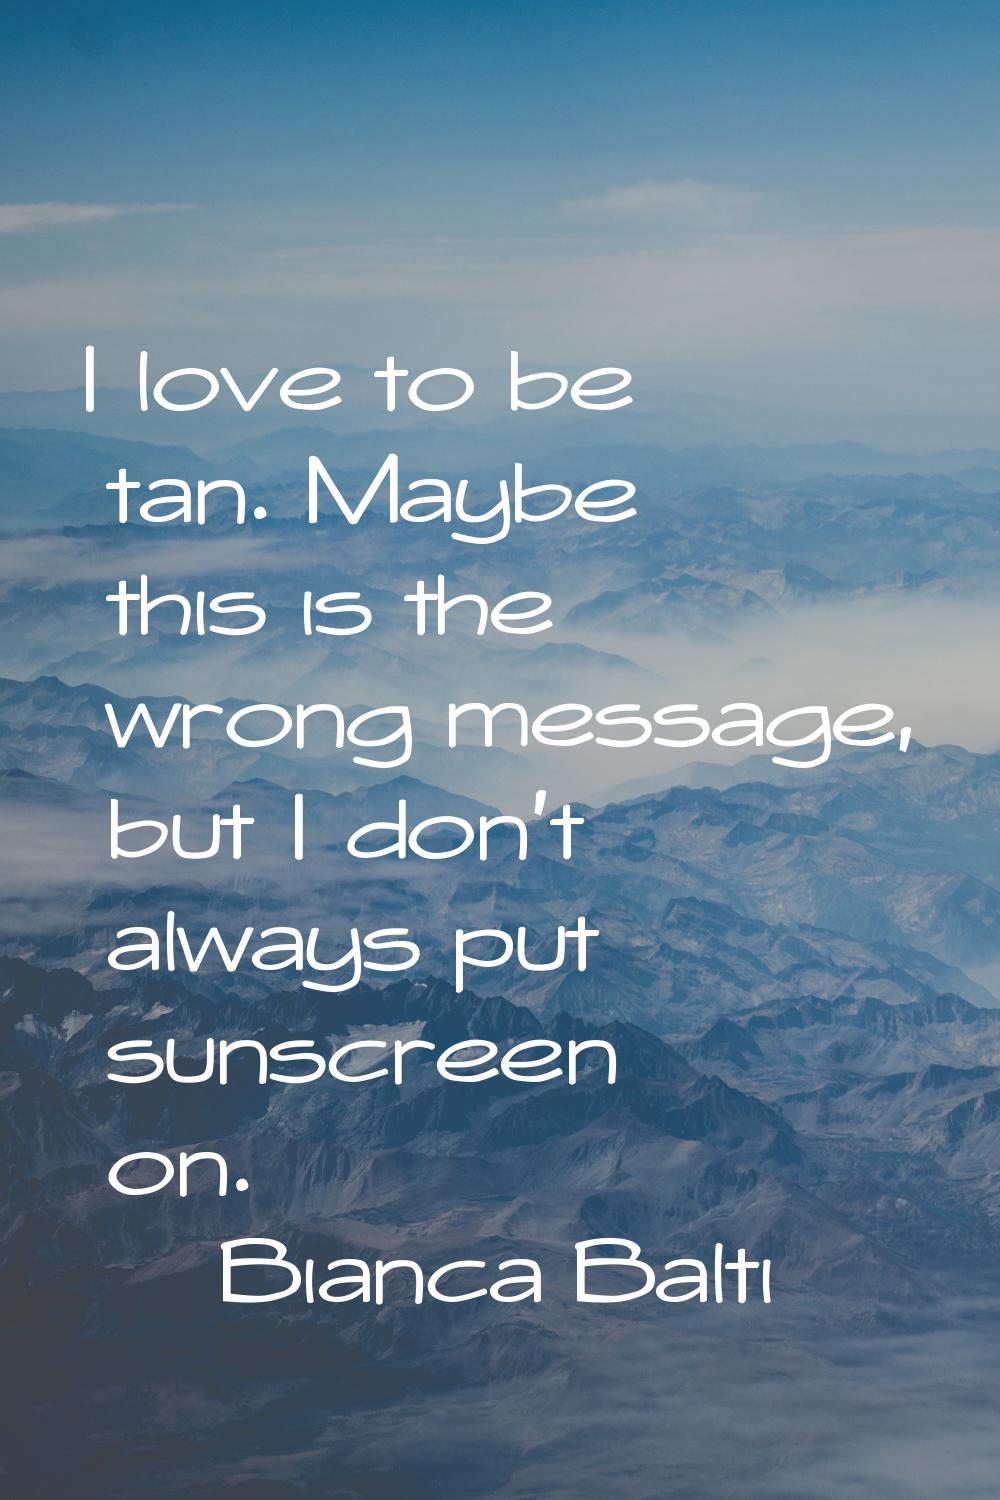 I love to be tan. Maybe this is the wrong message, but I don't always put sunscreen on.